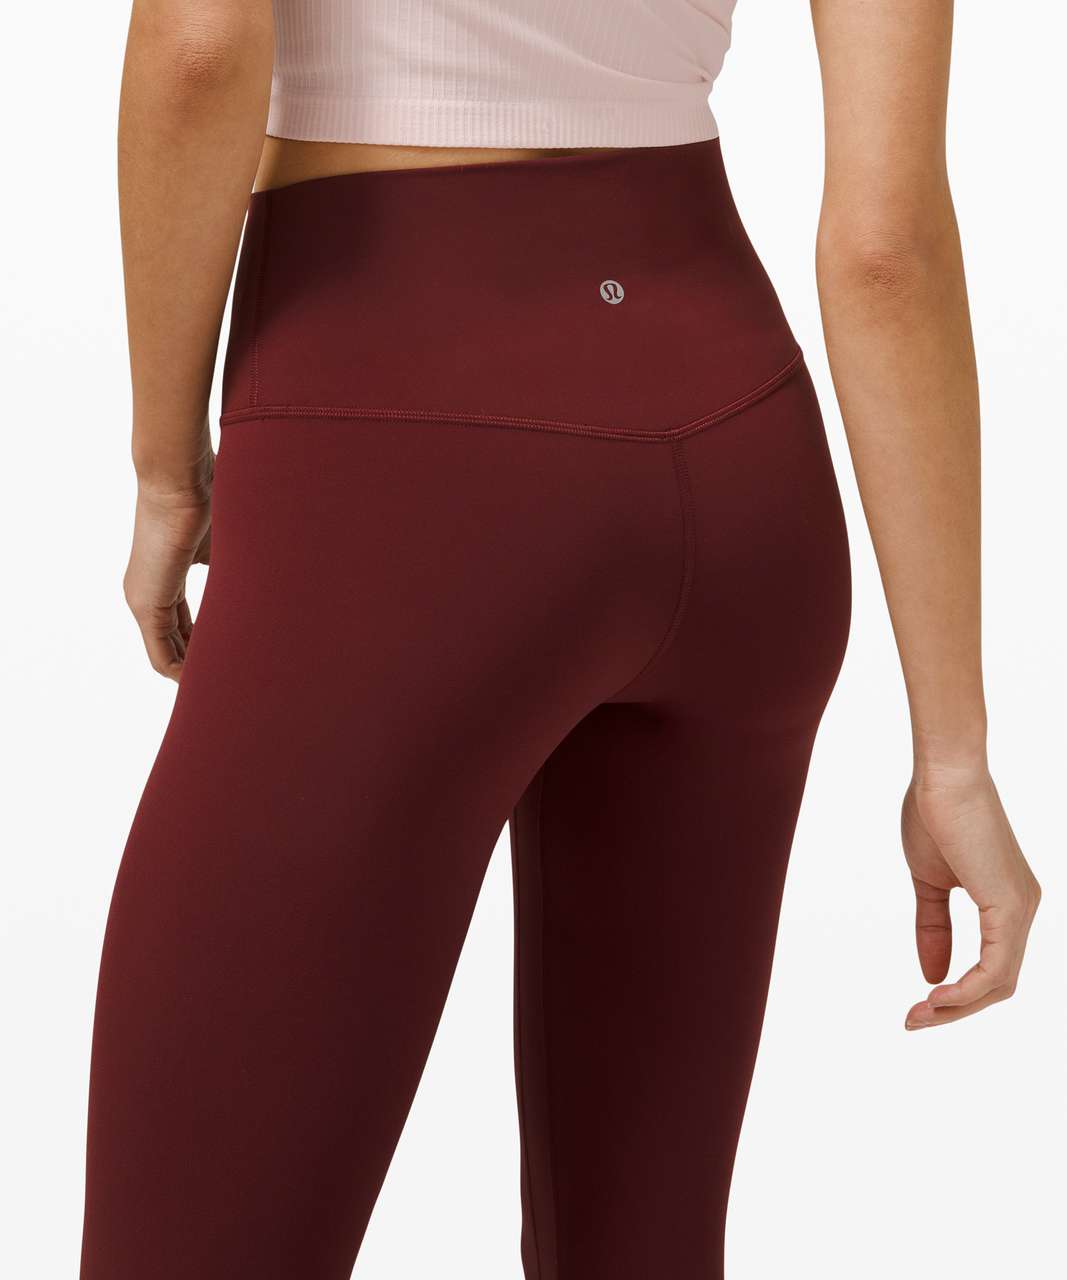 lululemon - As if we needed another reason to love the Align Pant (or  merlot, for that matter). One of our most popular styles is here in a brand  new colourway—So Merlot